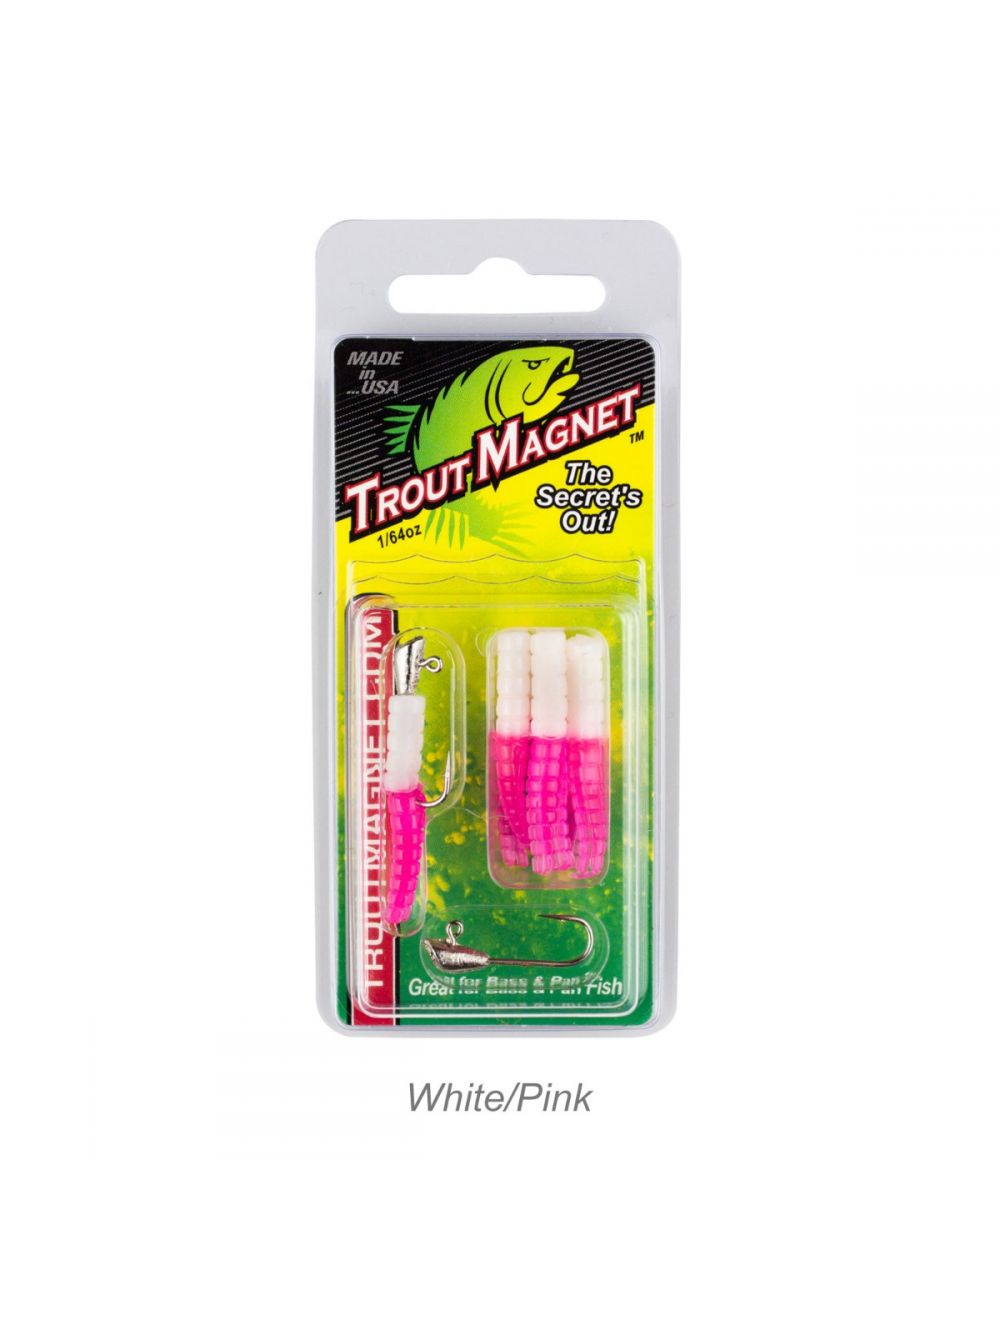 Leland Lures Trout Magnet 9pc Packs - White/Pink